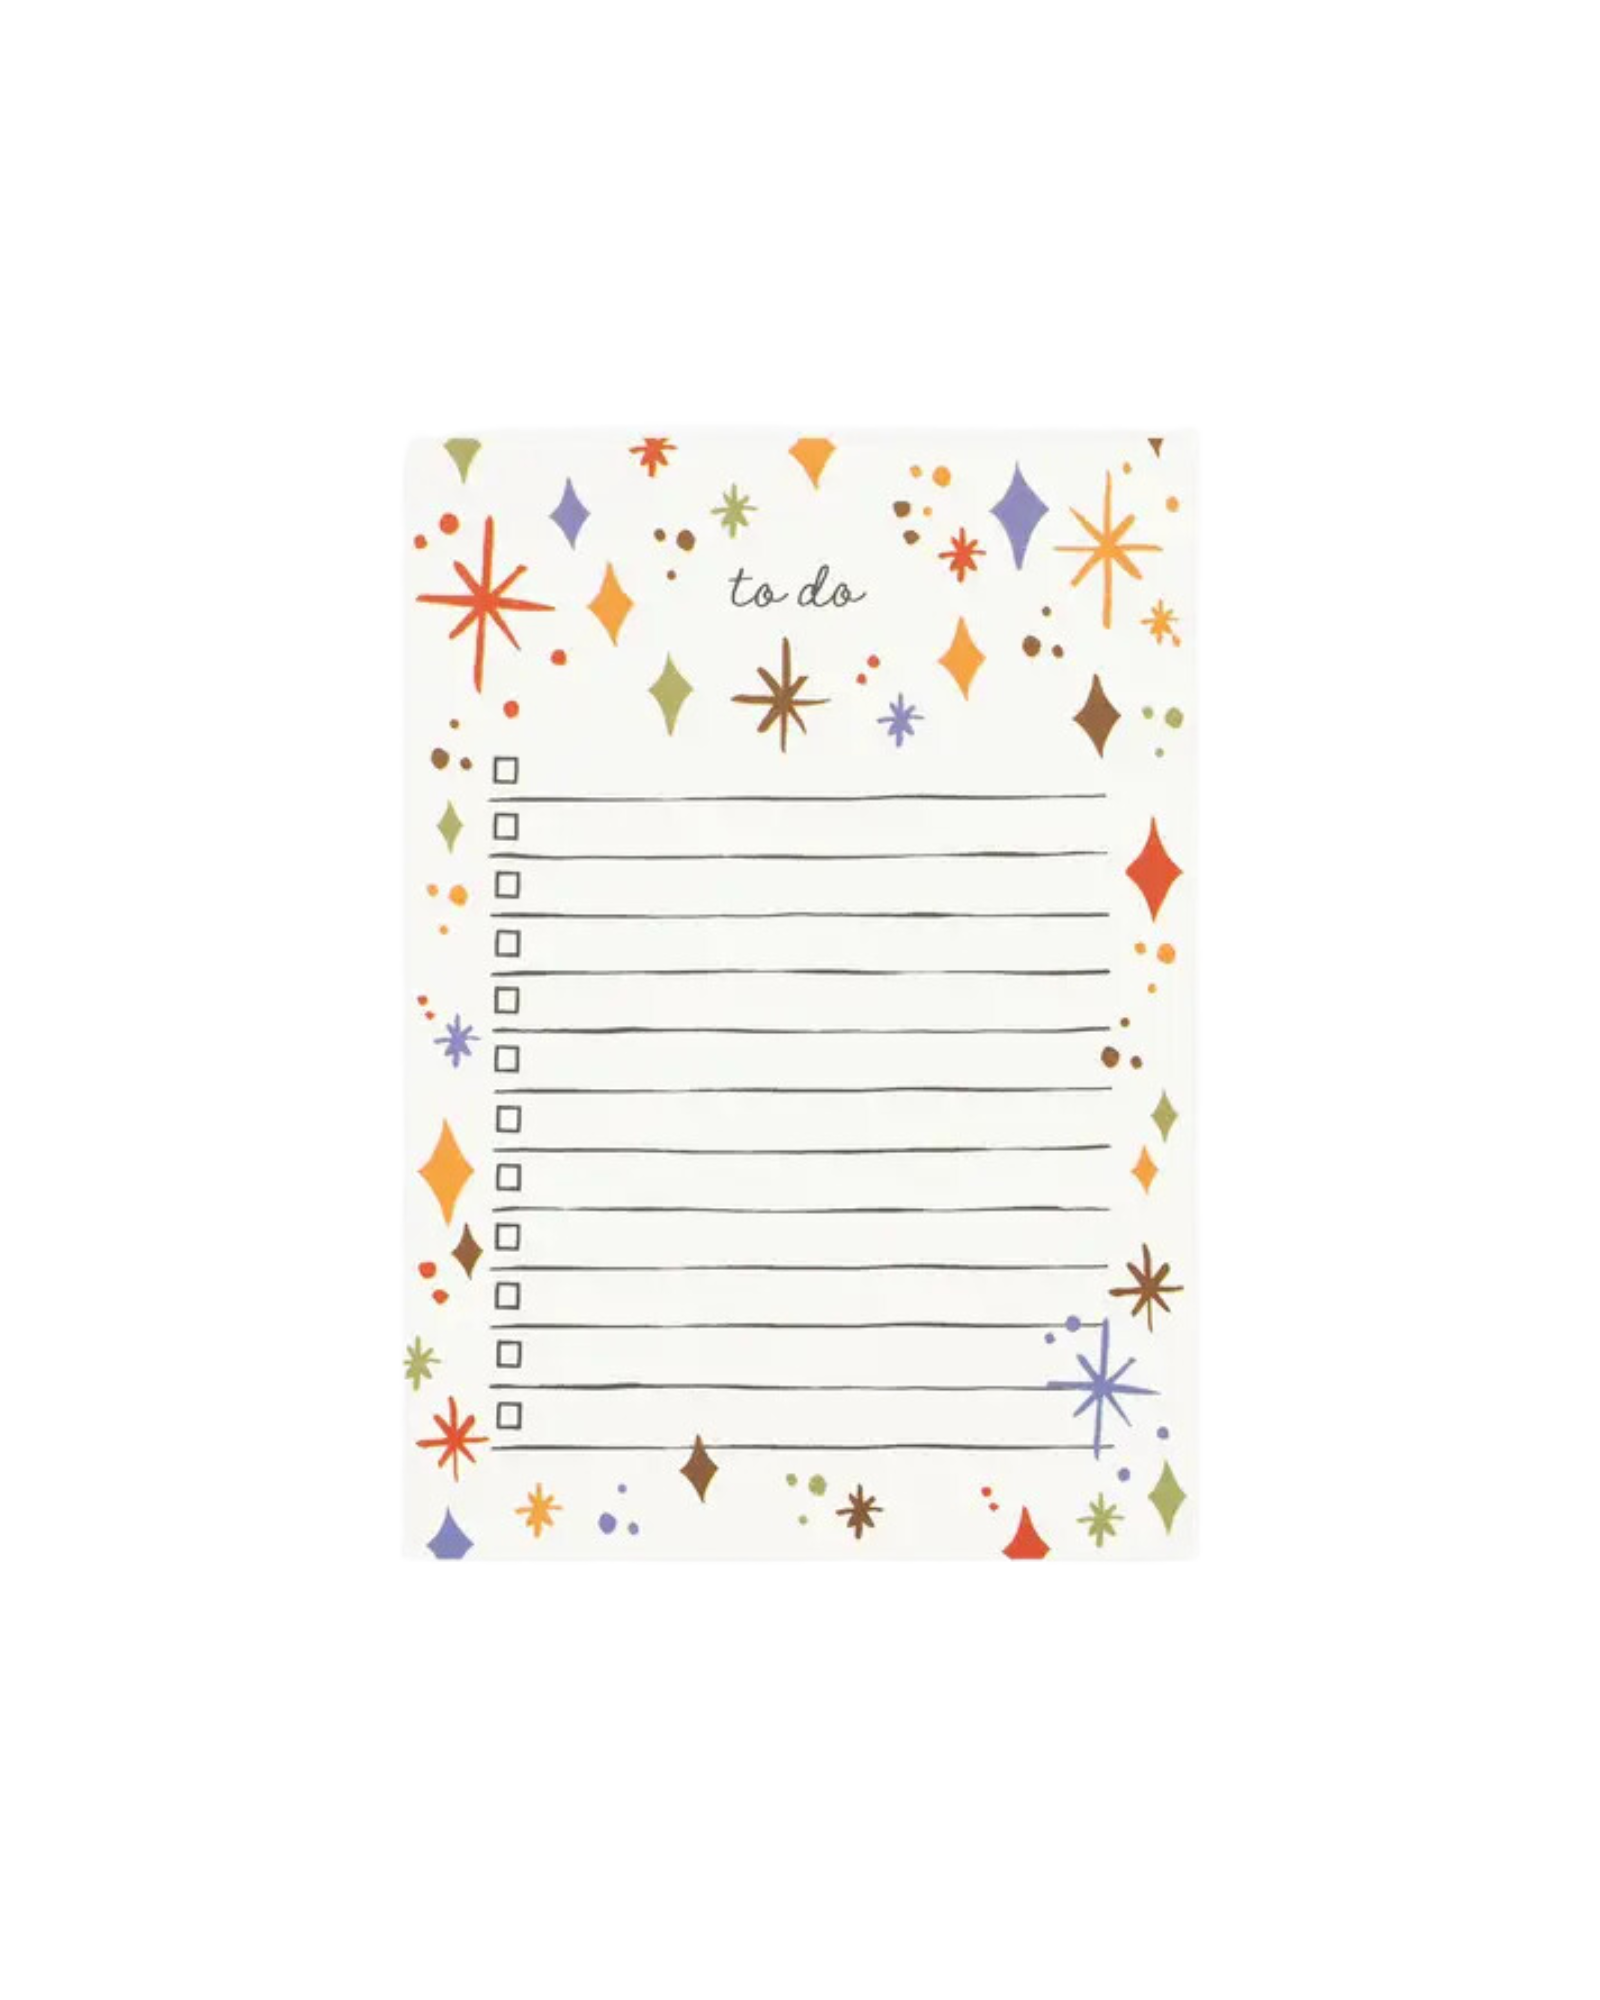 Personalized Notepads, Spiral Bound Pads, To-Do List, Set of 3 Note Pads,  Baby Shower Favors, Grocery List, Custom Note Pads, Baby Socks